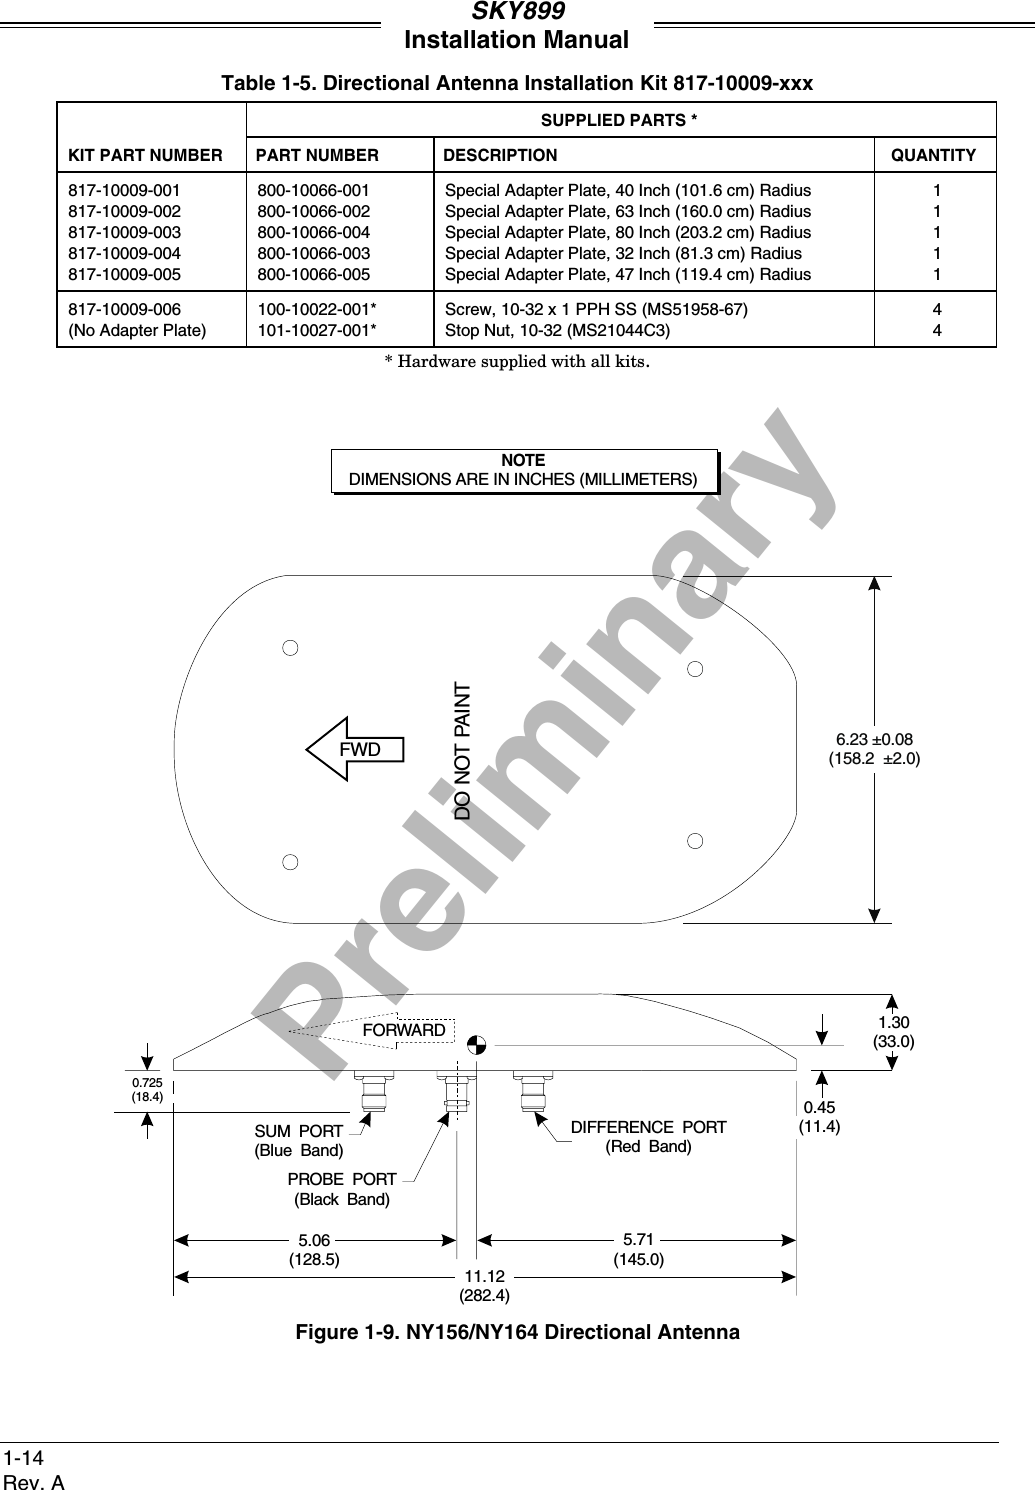 PreliminarySKY899Installation Manual1-14Rev. ATable 1-5. Directional Antenna Installation Kit 817-10009-xxxSUPPLIED PARTS *KIT PART NUMBER PART NUMBER DESCRIPTION QUANTITY817-10009-001 800-10066-001 Special Adapter Plate, 40 Inch (101.6 cm) Radius 1817-10009-002 800-10066-002 Special Adapter Plate, 63 Inch (160.0 cm) Radius 1817-10009-003 800-10066-004 Special Adapter Plate, 80 Inch (203.2 cm) Radius 1817-10009-004 800-10066-003 Special Adapter Plate, 32 Inch (81.3 cm) Radius 1817-10009-005 800-10066-005 Special Adapter Plate, 47 Inch (119.4 cm) Radius 1817-10009-006(No Adapter Plate)100-10022-001*101-10027-001*Screw, 10-32 x 1 PPH SS (MS51958-67)Stop Nut, 10-32 (MS21044C3)44* Hardware supplied with all kits.PROBE PORT(Black Band)5.06(128.5)11.12(282.4)5.71(145.0)SUM PORT(Blue Band)FORWARDDIFFERENCE PORT(Red Band)6.23 ±0.08(158.2  ±2.0)DO NOT PAINTFWD0.45(11.4)1.30(33.0)0.725(18.4)NOTEDIMENSIONS ARE IN INCHES (MILLIMETERS)Figure 1-9. NY156/NY164 Directional Antenna